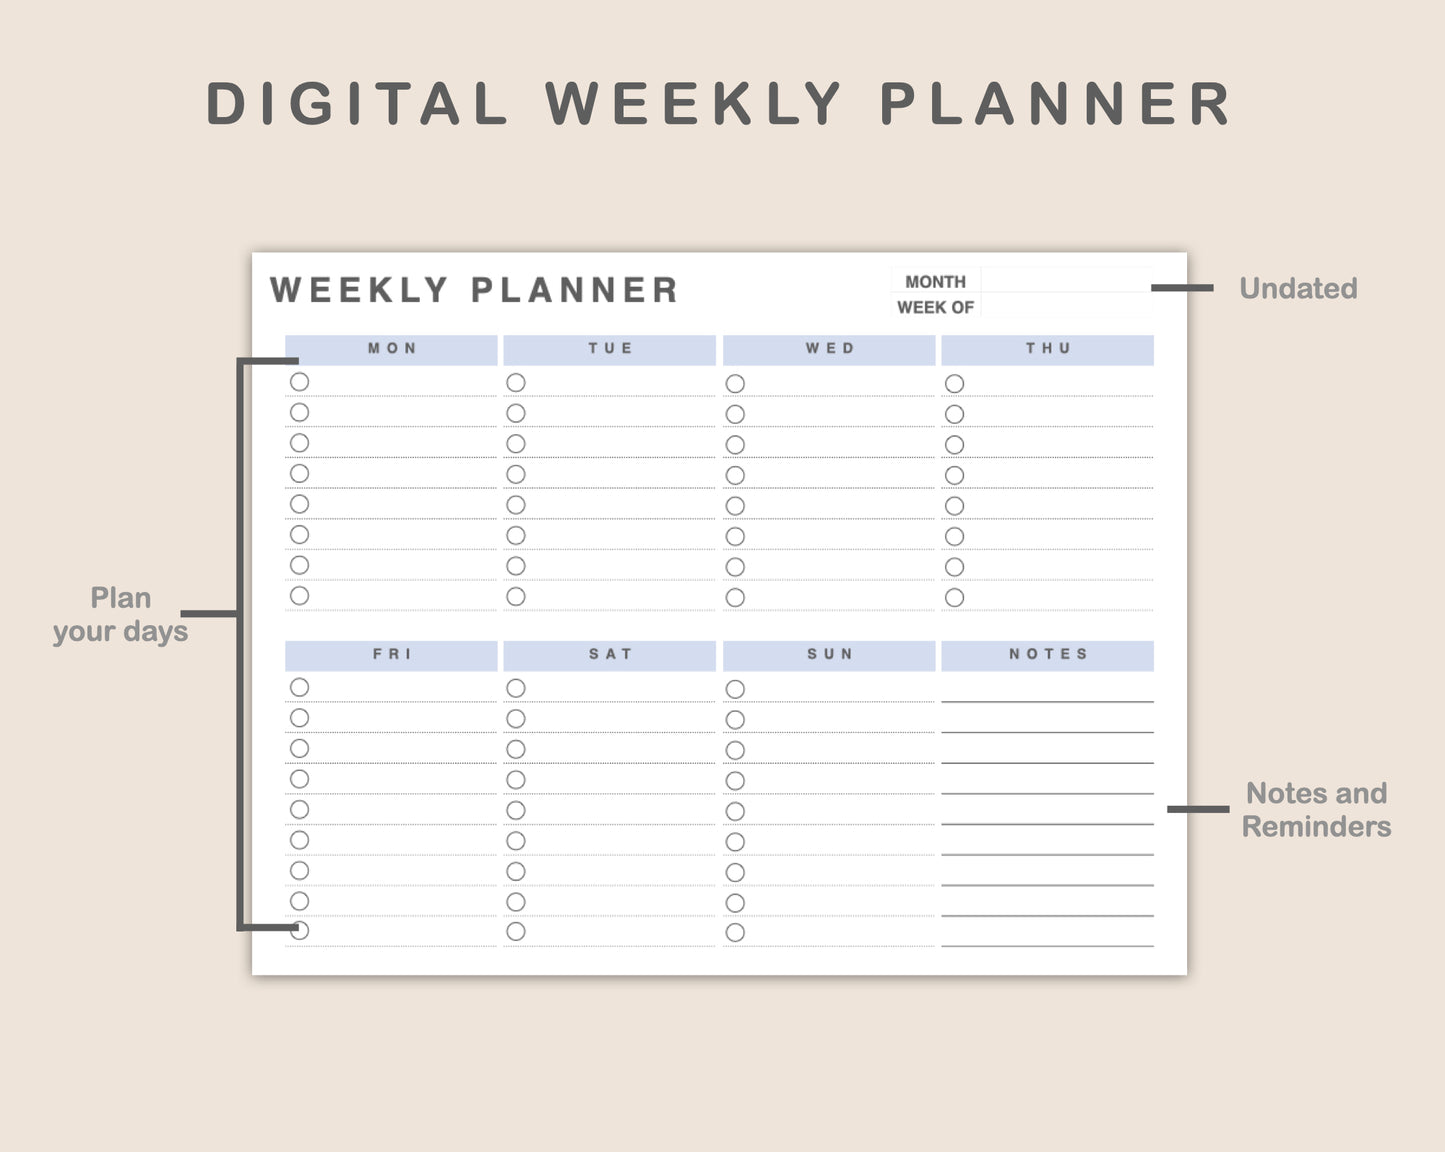 Weekly Planner, To Do List - Landscape